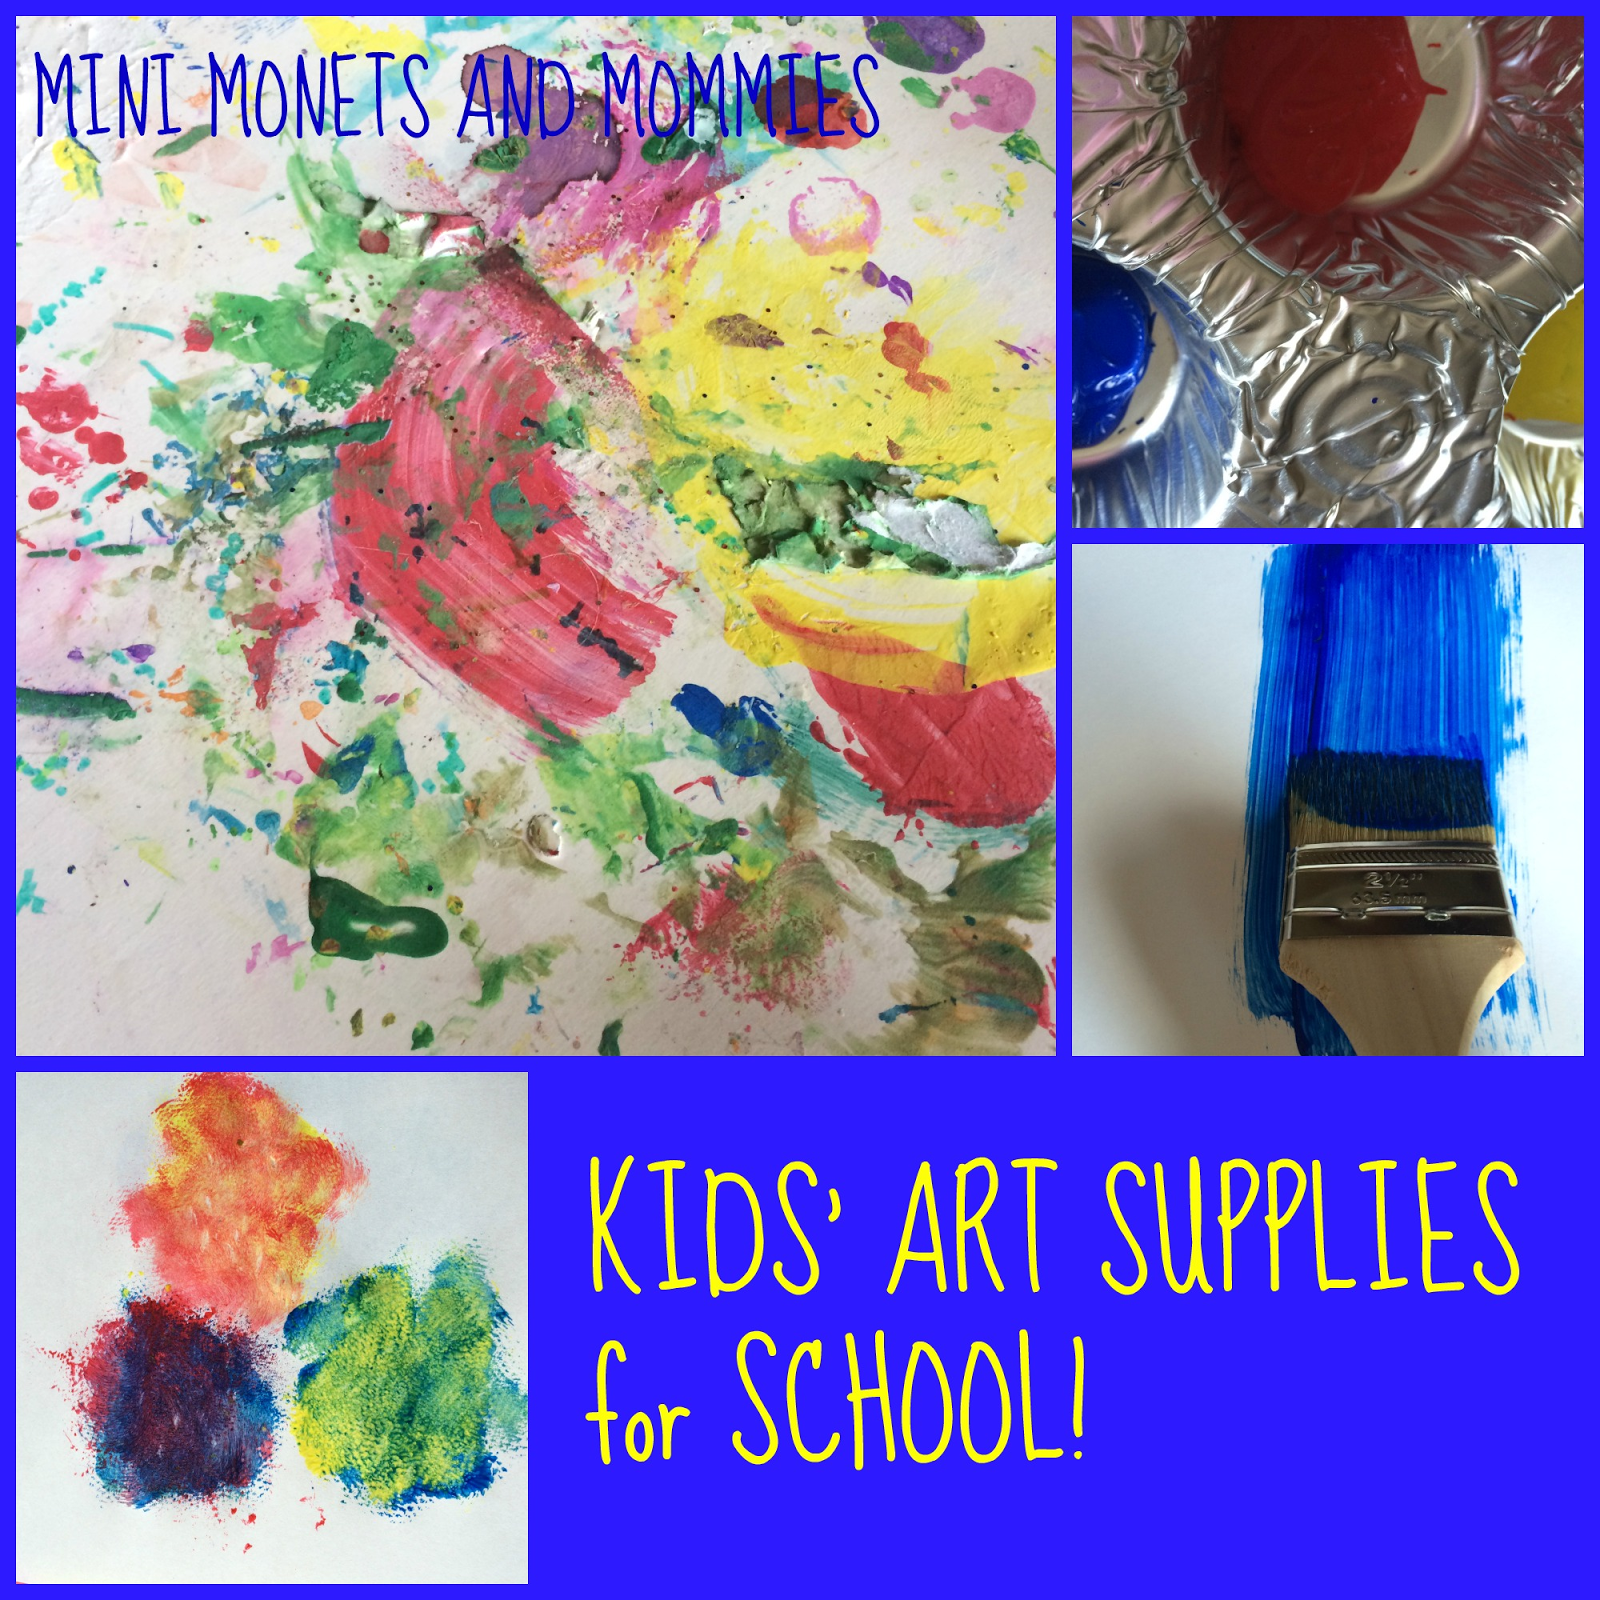 Mini Monets and Mommies: Back to School Art Supplies for Kids